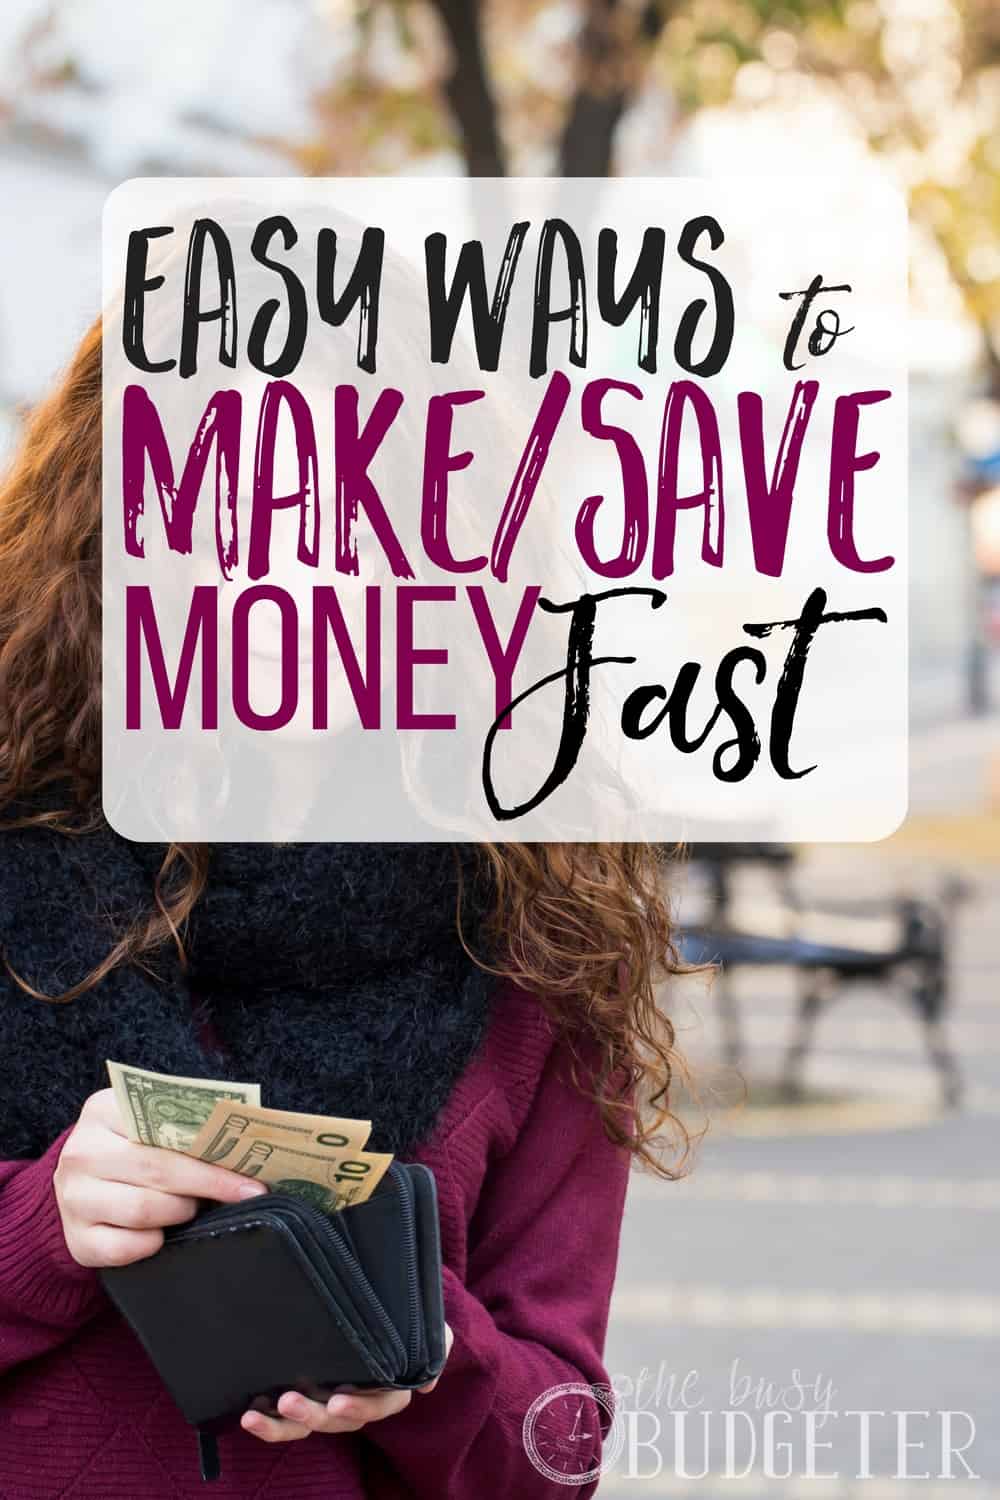 Great ideas to make money fast! I'm trying to find ways to make money from home and get some side hustle ideas. This was full of them. These are more ways to make a bunch of money quickly rather than start a business or a career, but definitely helpful. 